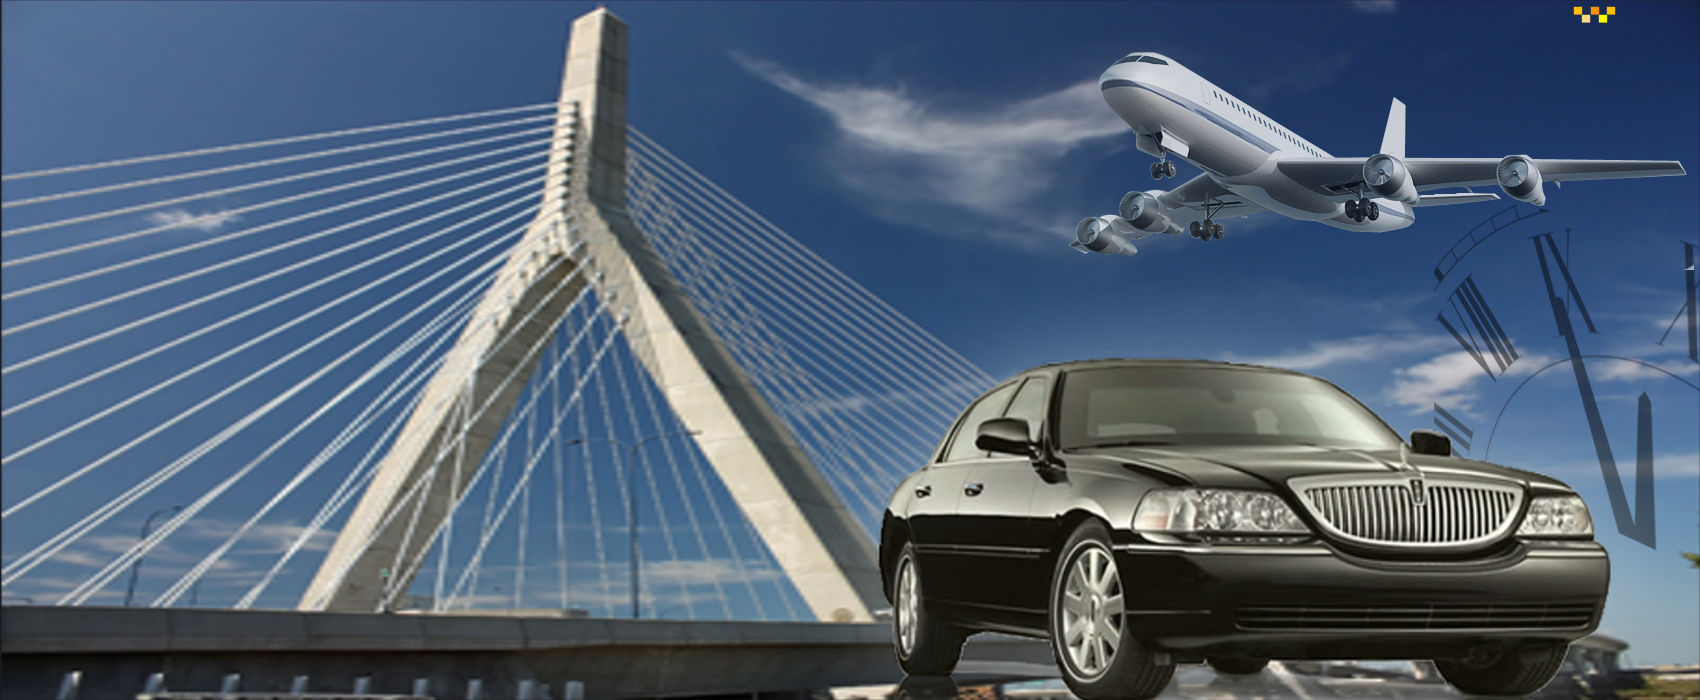 Hourly Taxi Service for Grater Boston and Suburbs